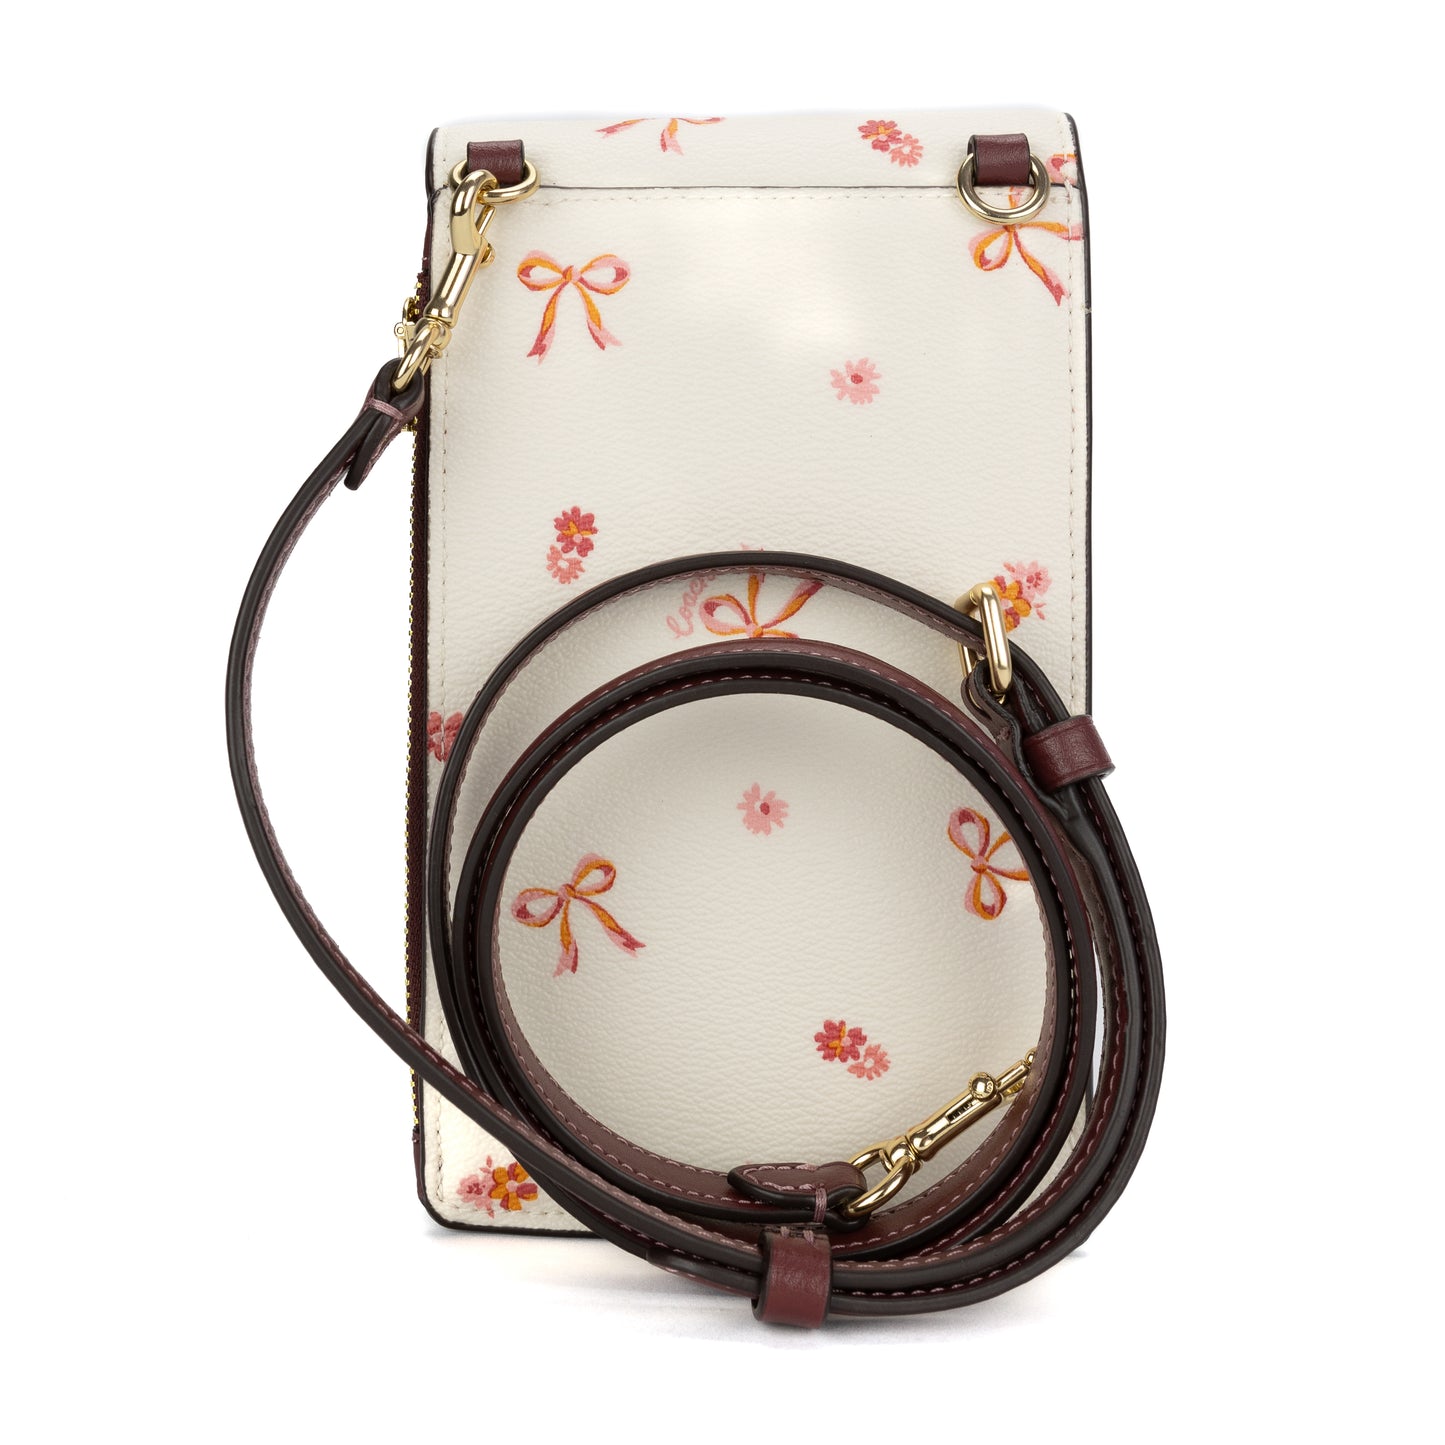 Coach Women's North South Phone Crossbody with Bow Print - Chalk/wine Multi